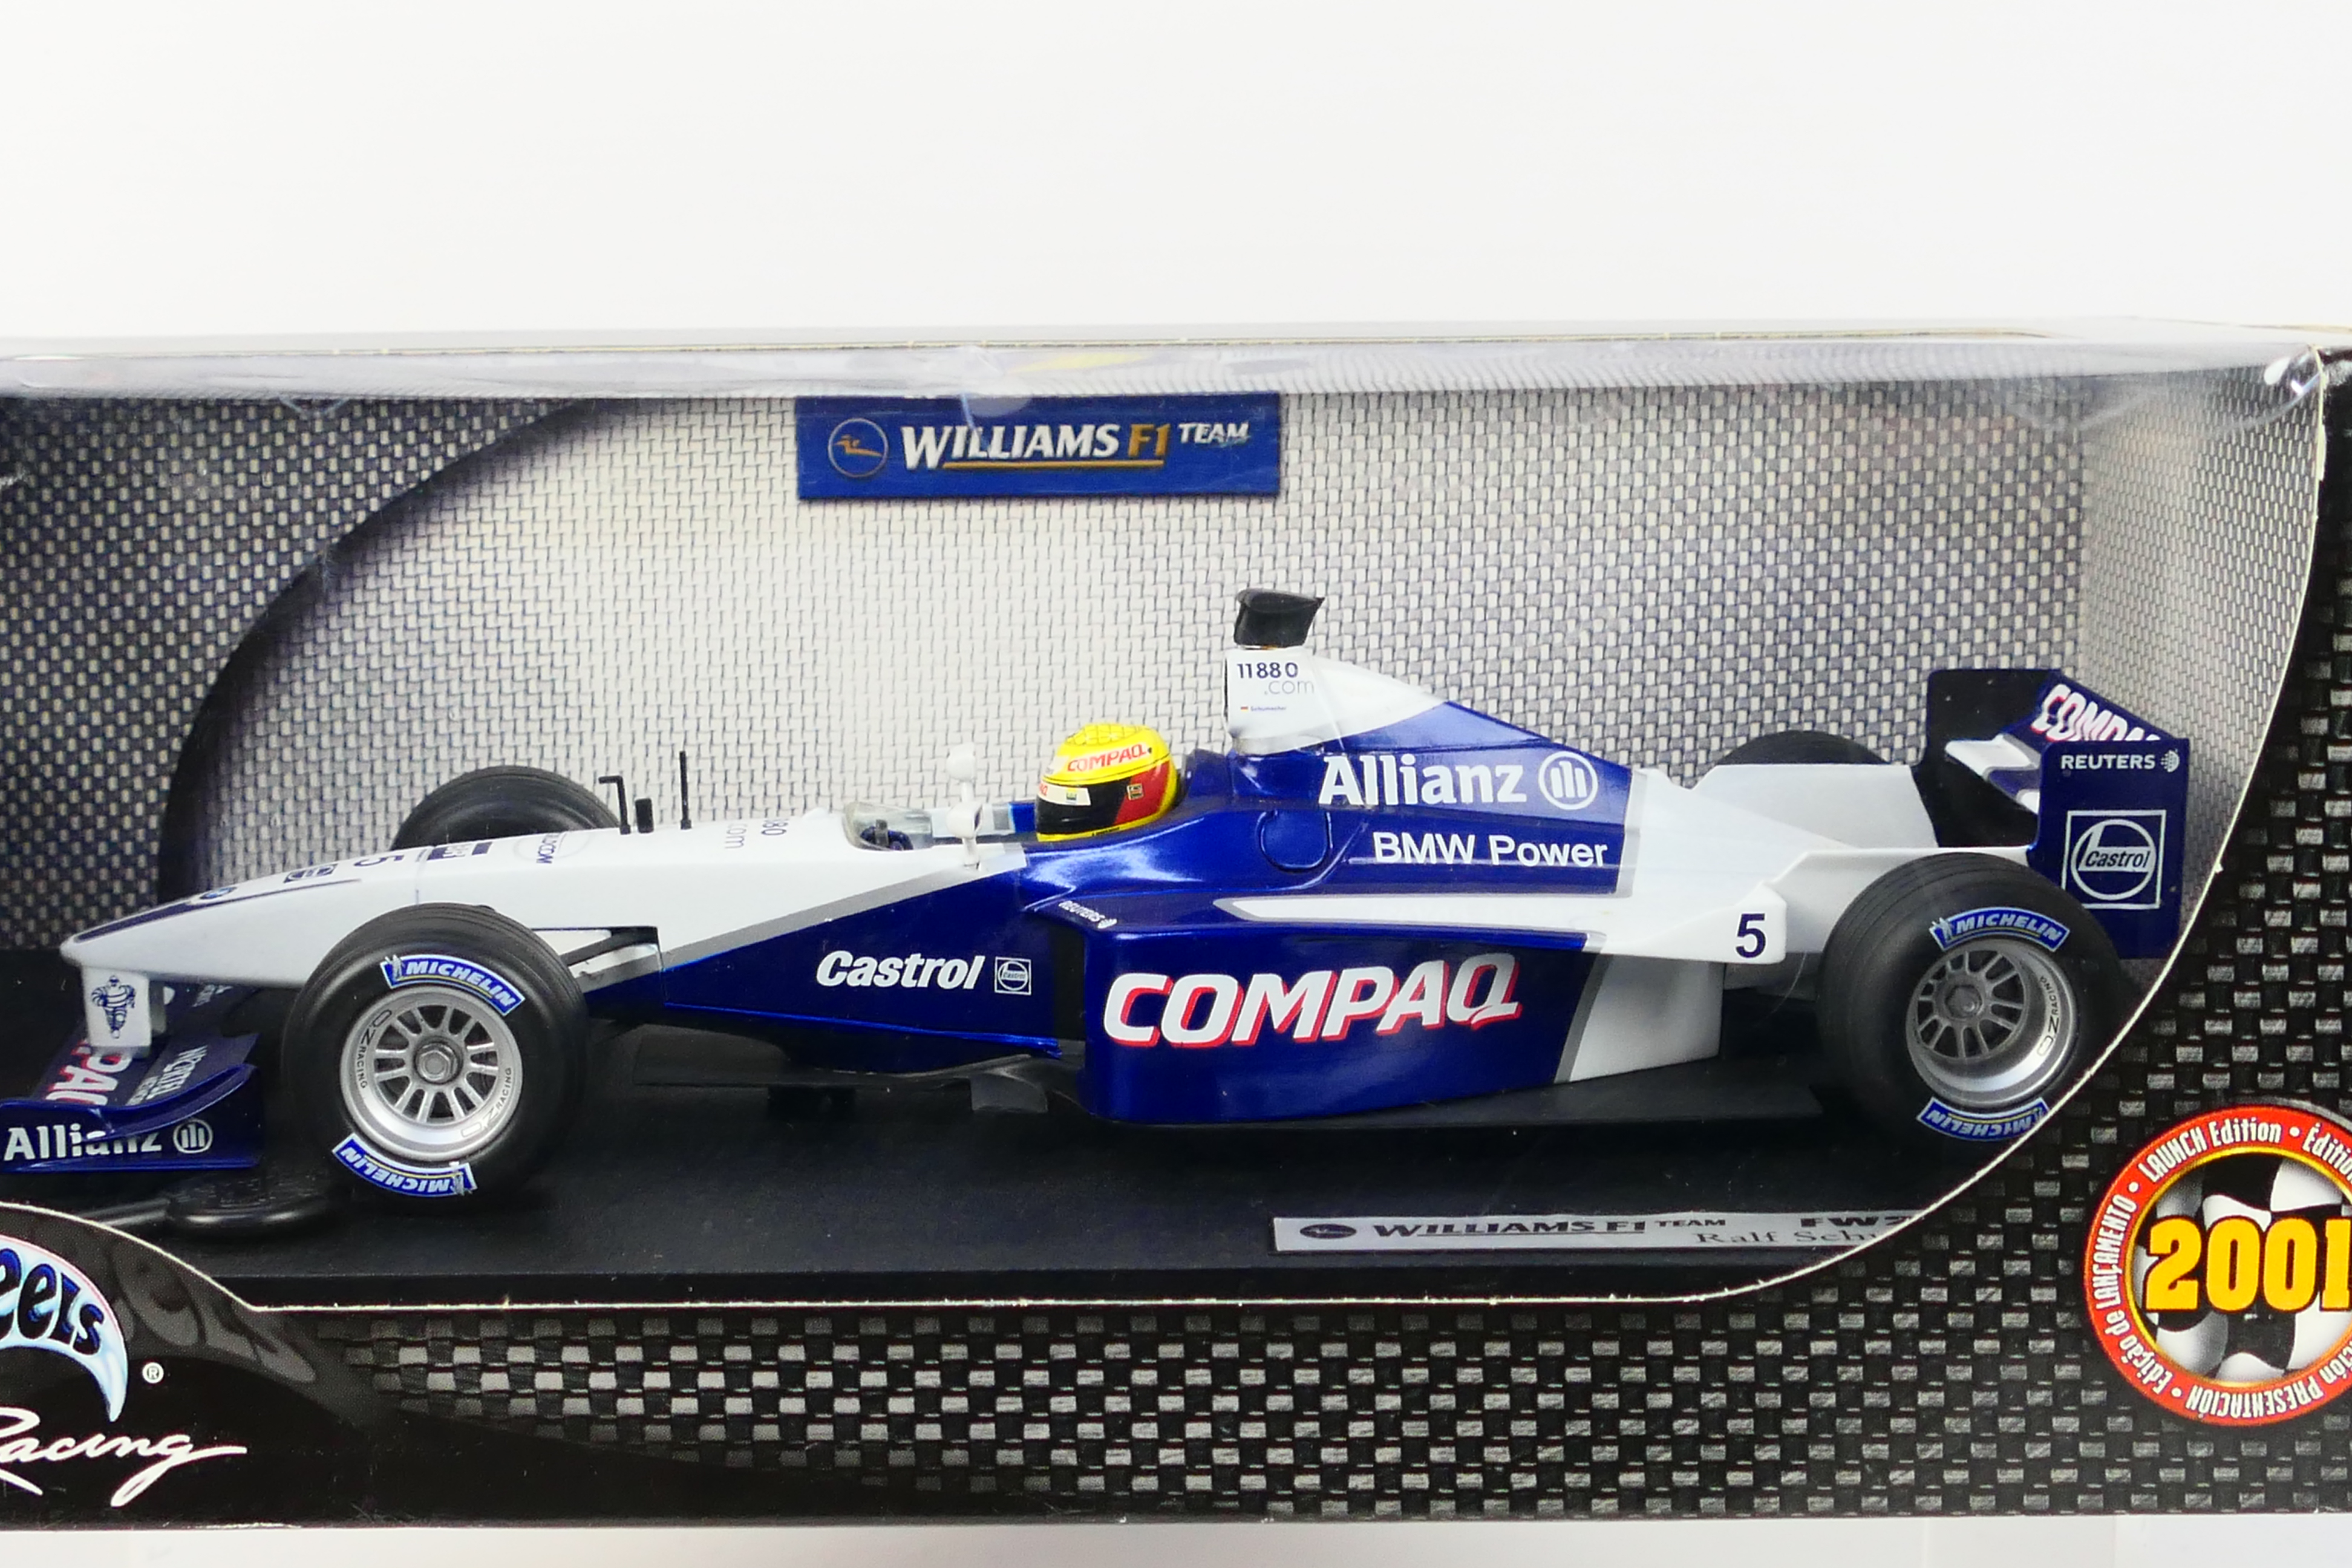 Hot Wheels - A boxed 1:18 scale Williams FW23 Ralf Schumacher 2001 F1 car # 50168. - Image 2 of 3